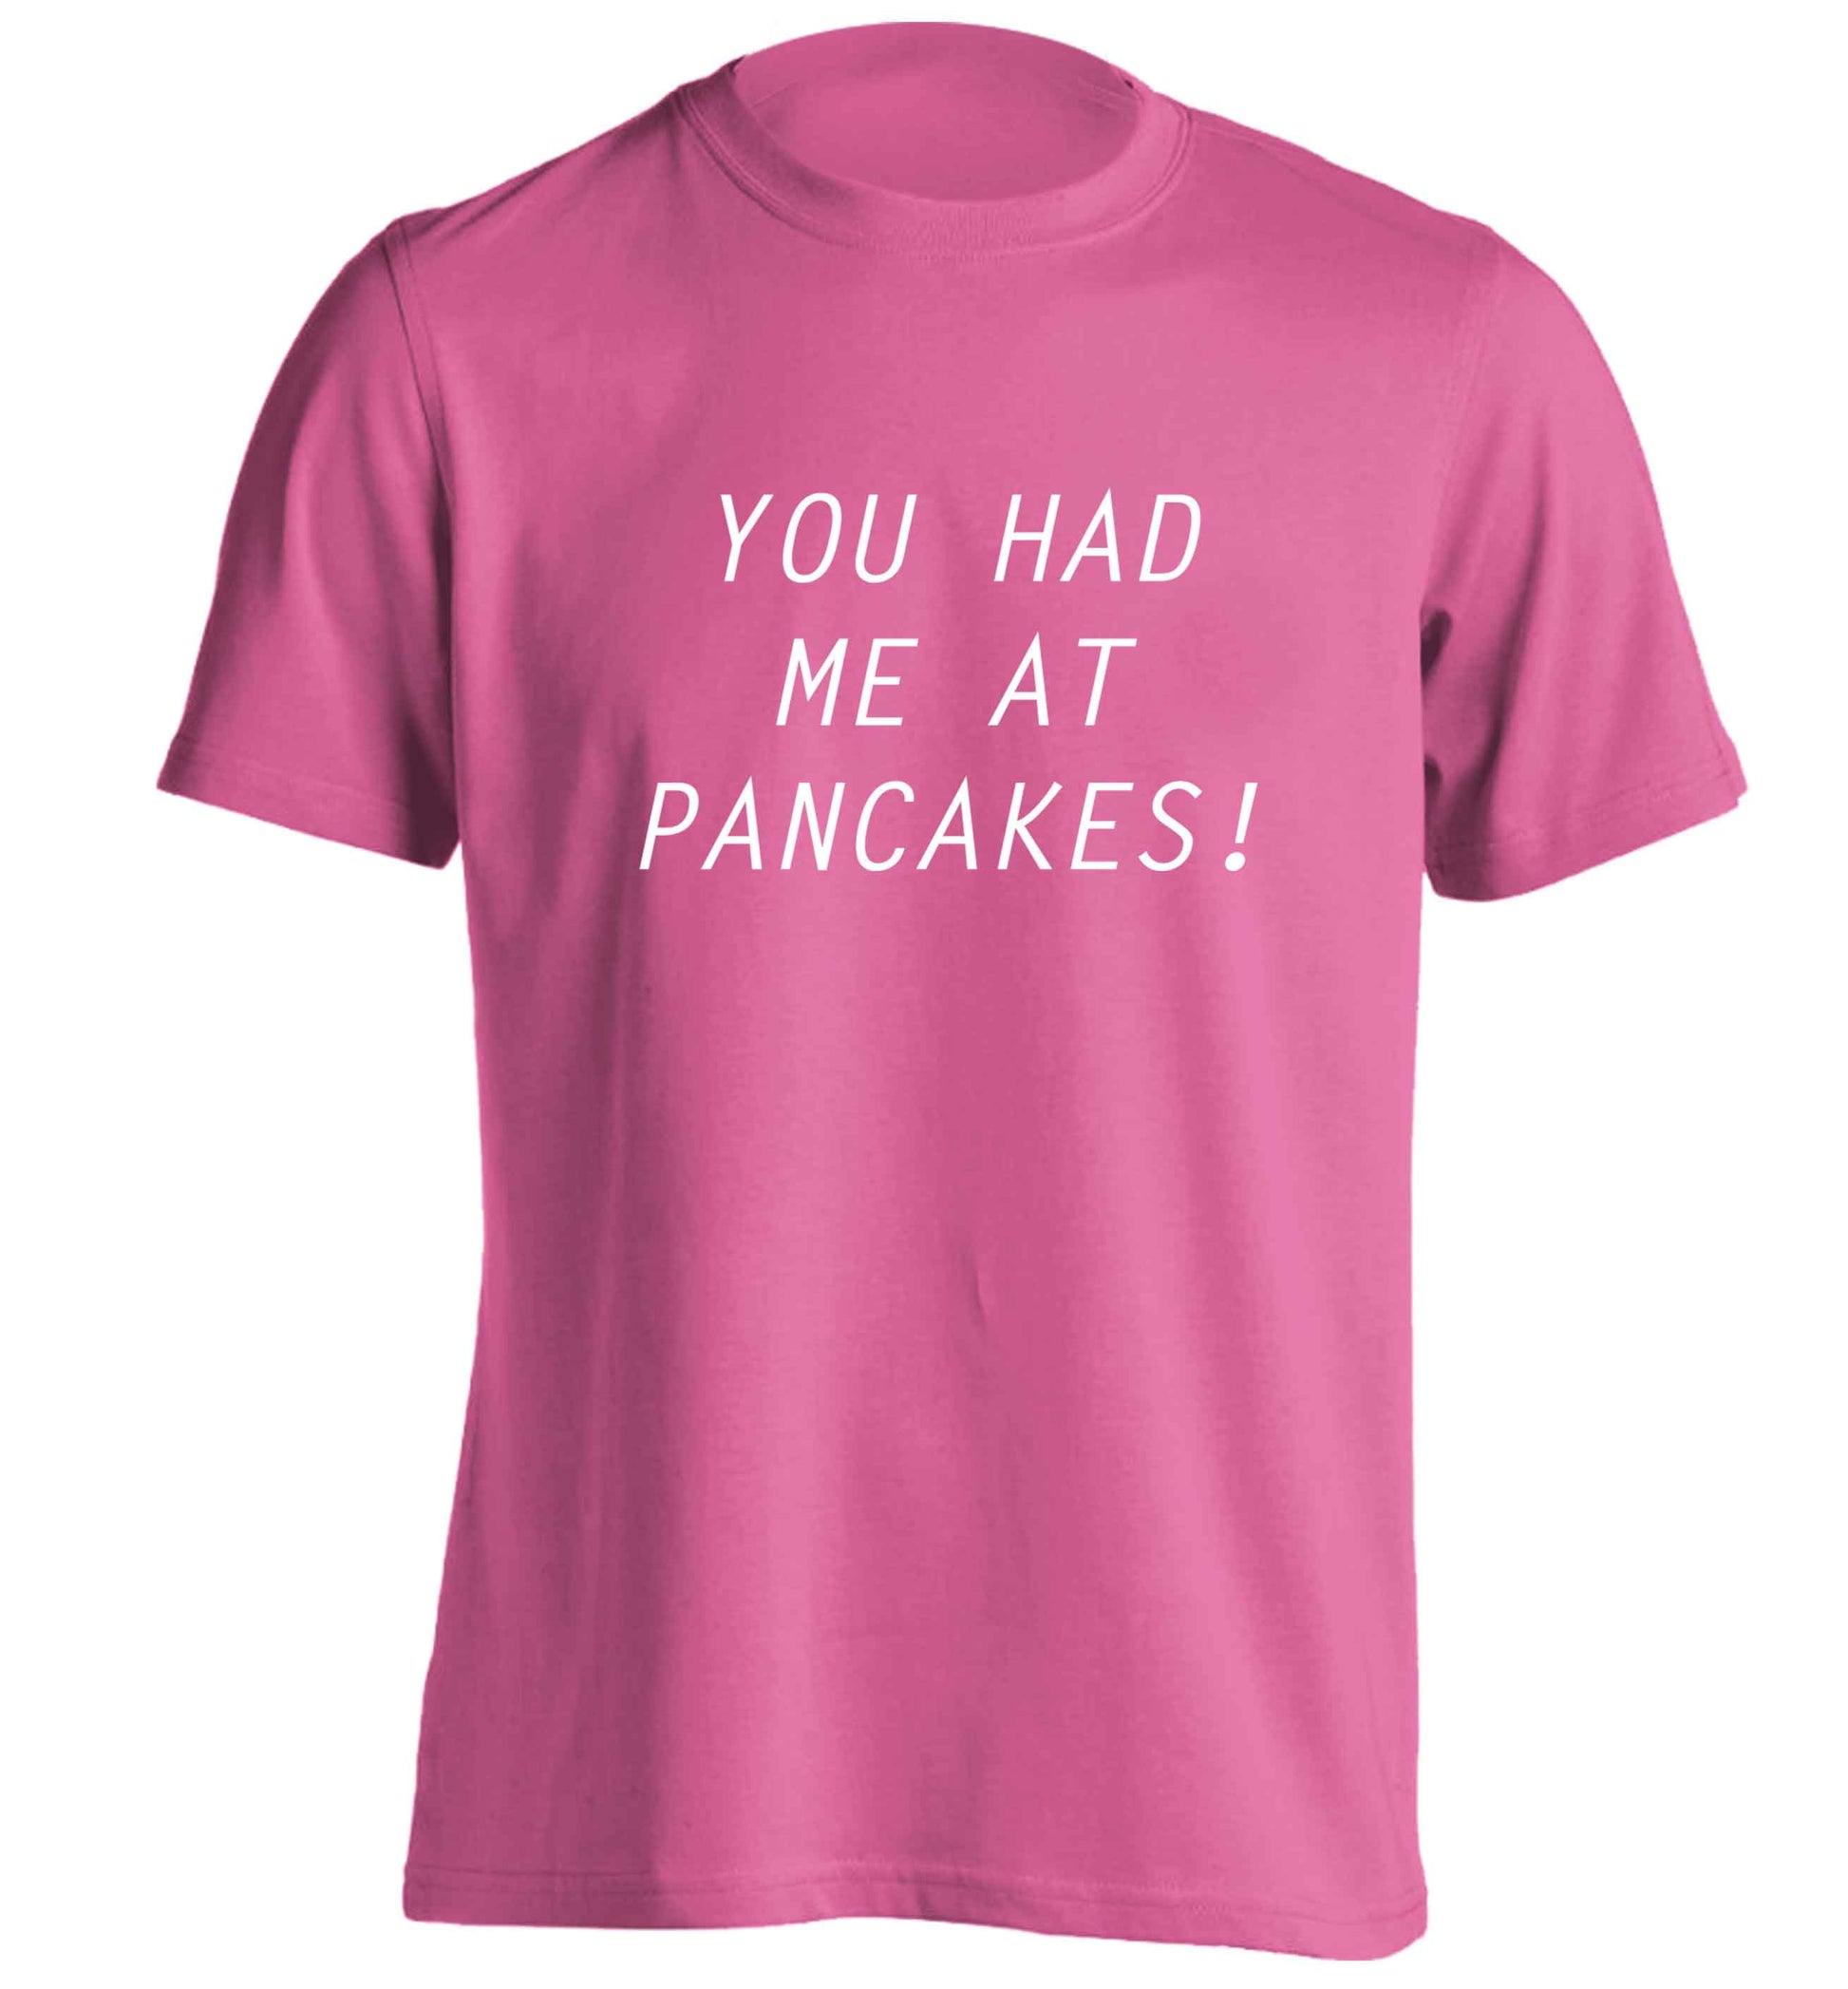 You had me at pancakes adults unisex pink Tshirt 2XL